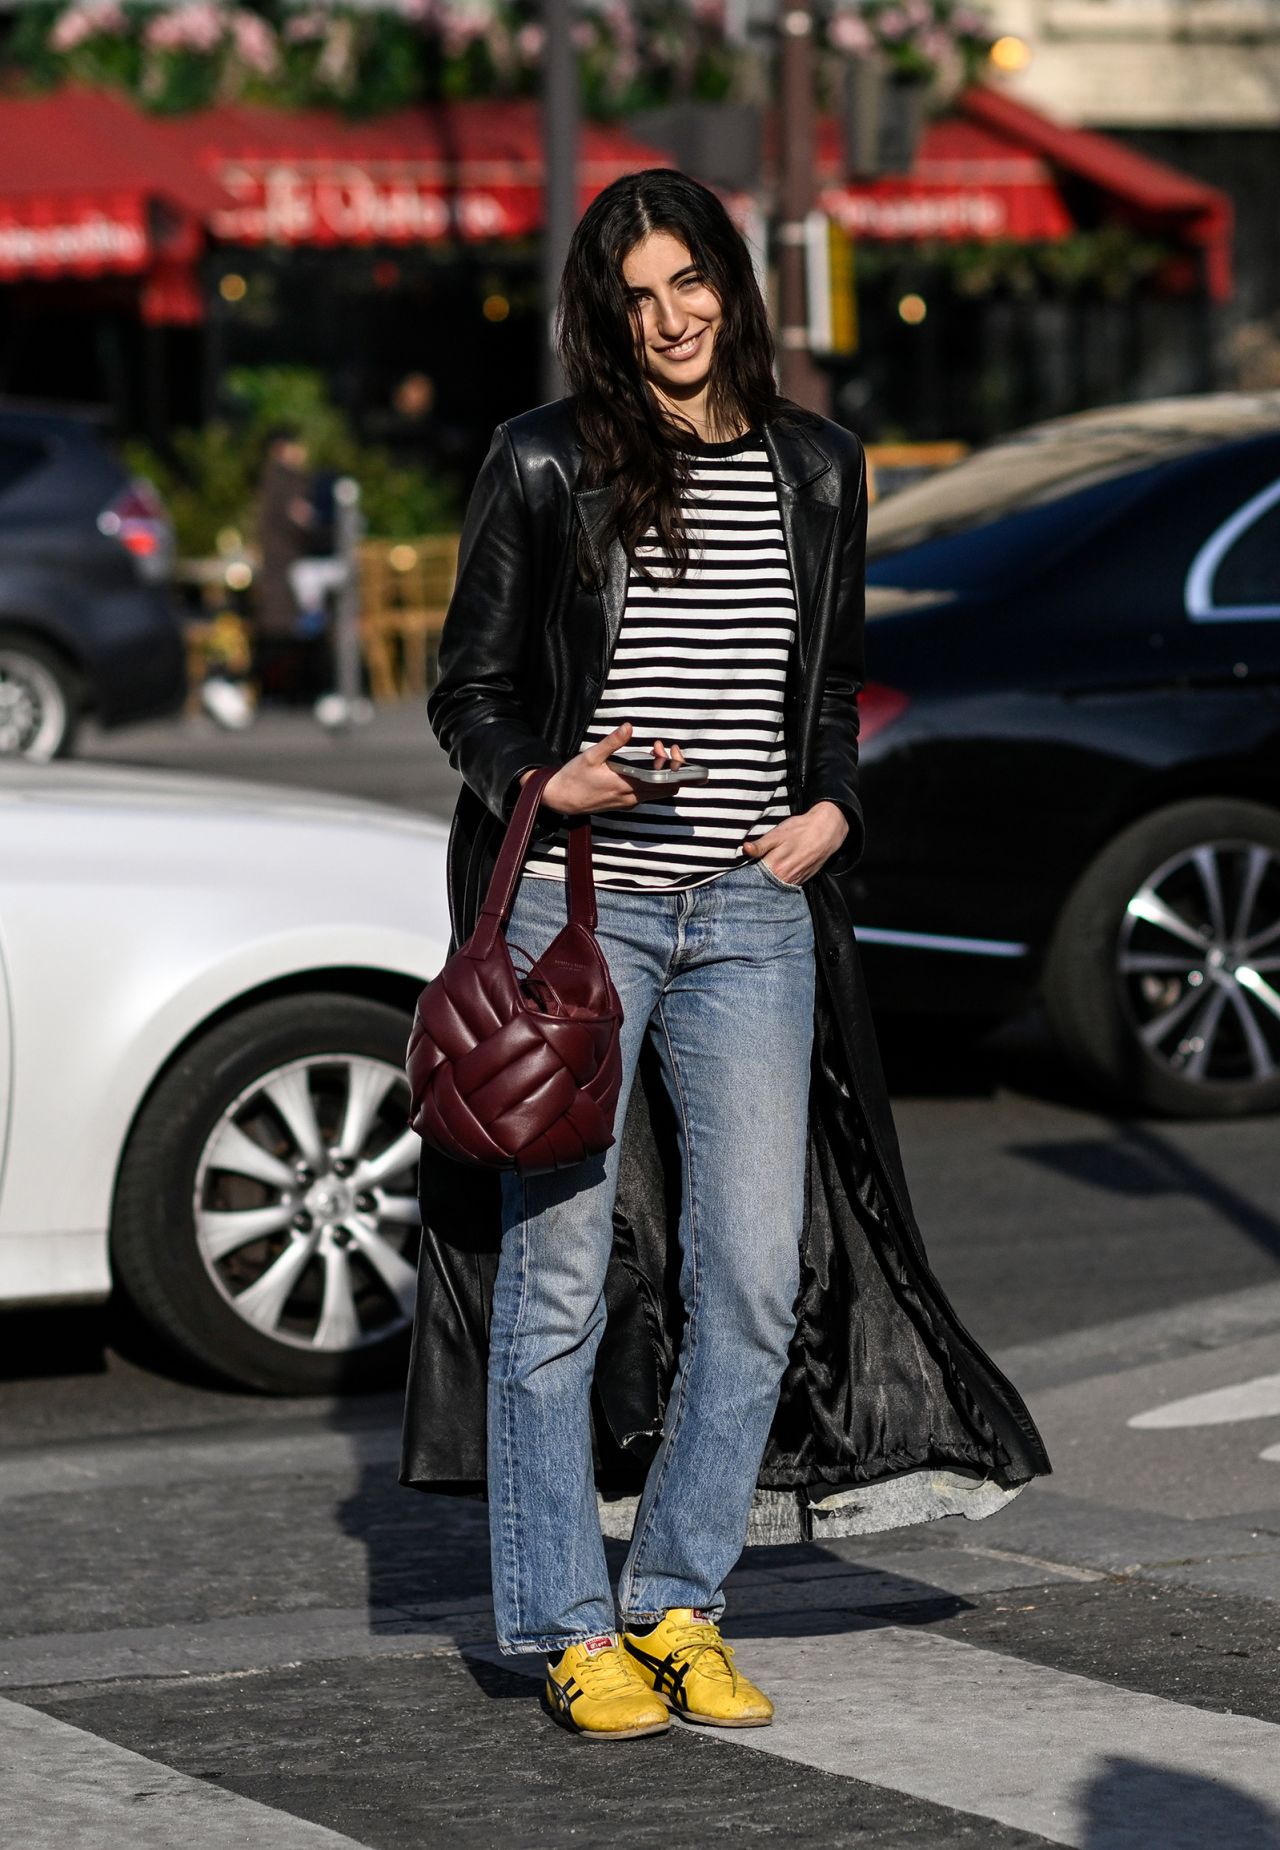 PARIS, FRANCE - MARCH 01: A model is seen wearing a black leather coat, black and white striped shirt, blue jeans and yellow sneakers with a maroon bag outside the Dries Van Noten show during Paris Fashion Week F/W 2023 on March 01, 2023 in Paris, France. (Photo by Daniel Zuchnik/Getty Images)